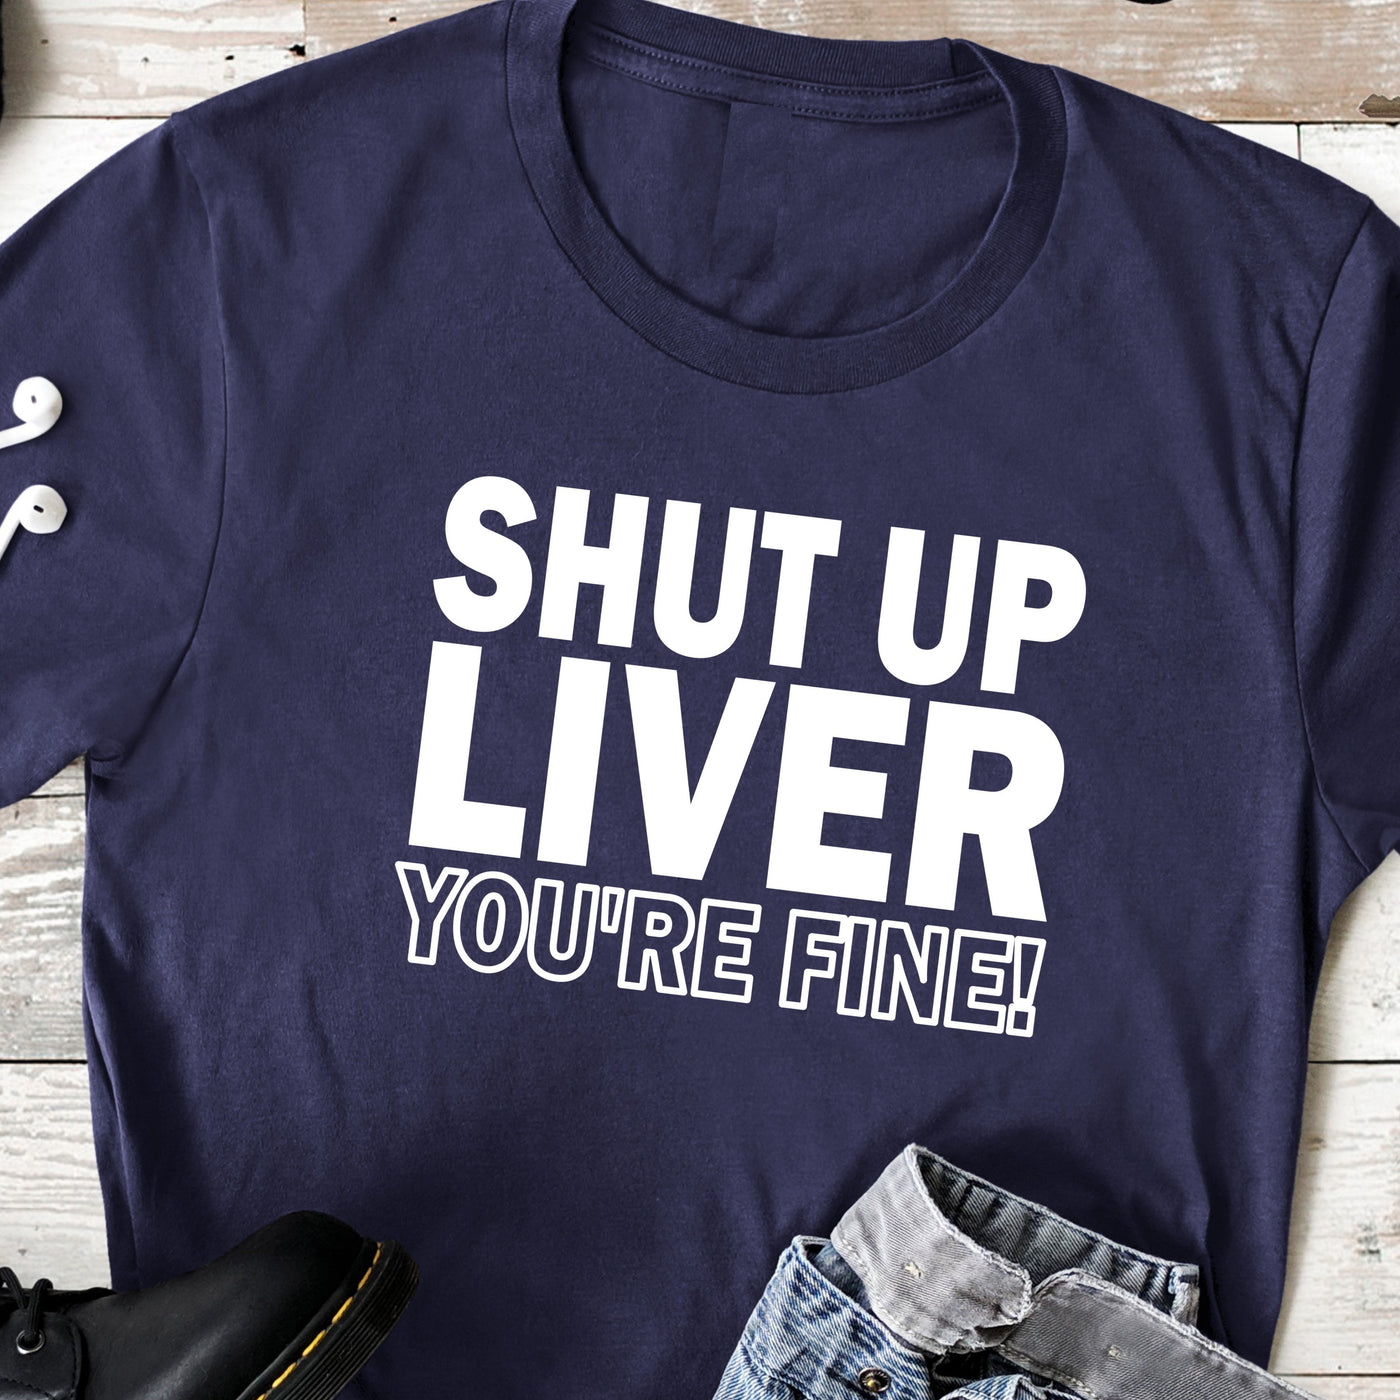 Shut Up Liver You're Fine | Funny Drinking Shirts